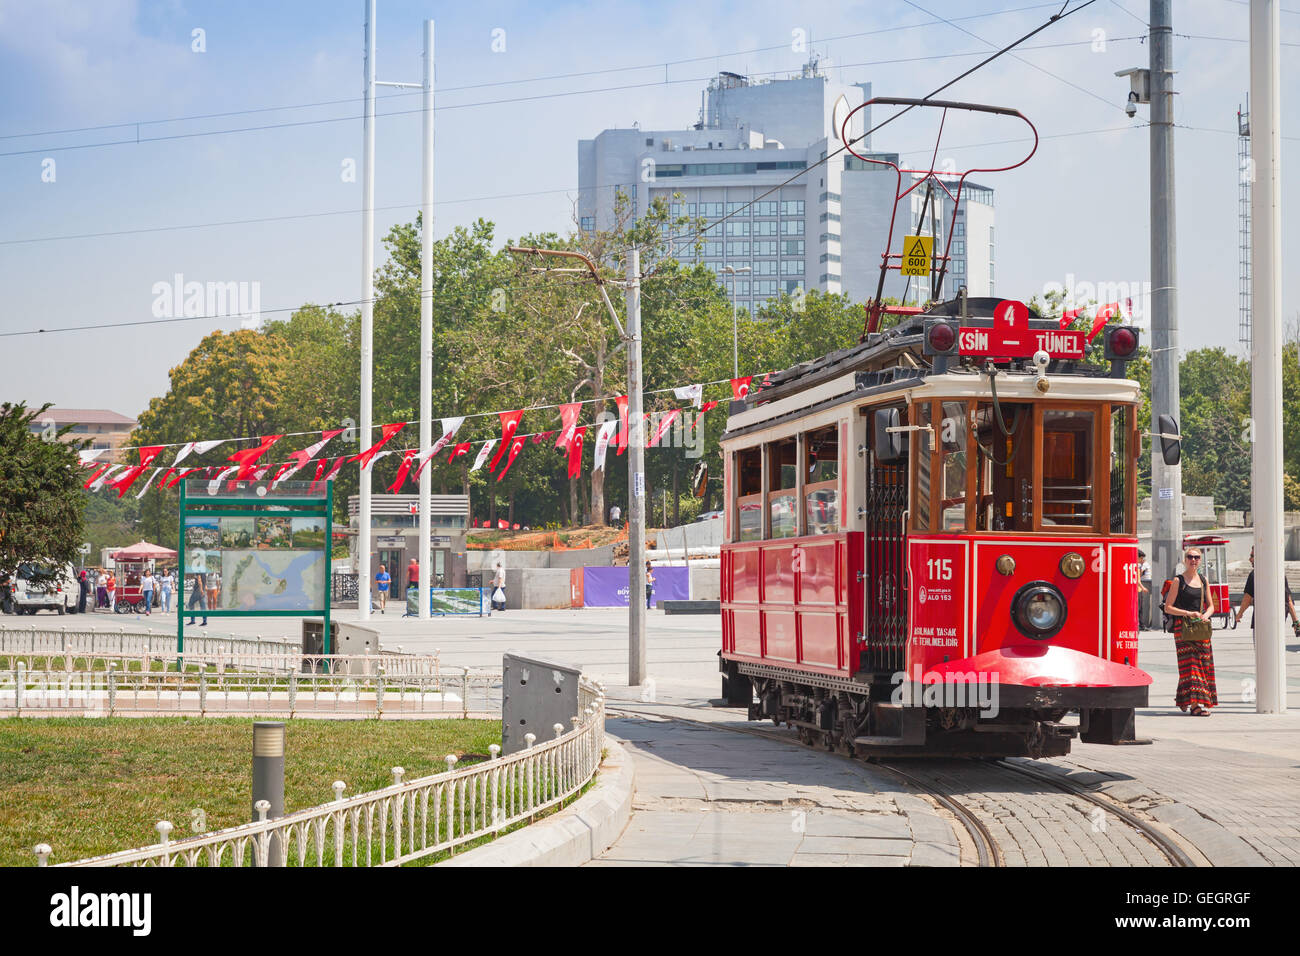 Istanbul, Turkey - July 1, 2016: Vintage red tram goes on Taksim square in Istanbul Stock Photo